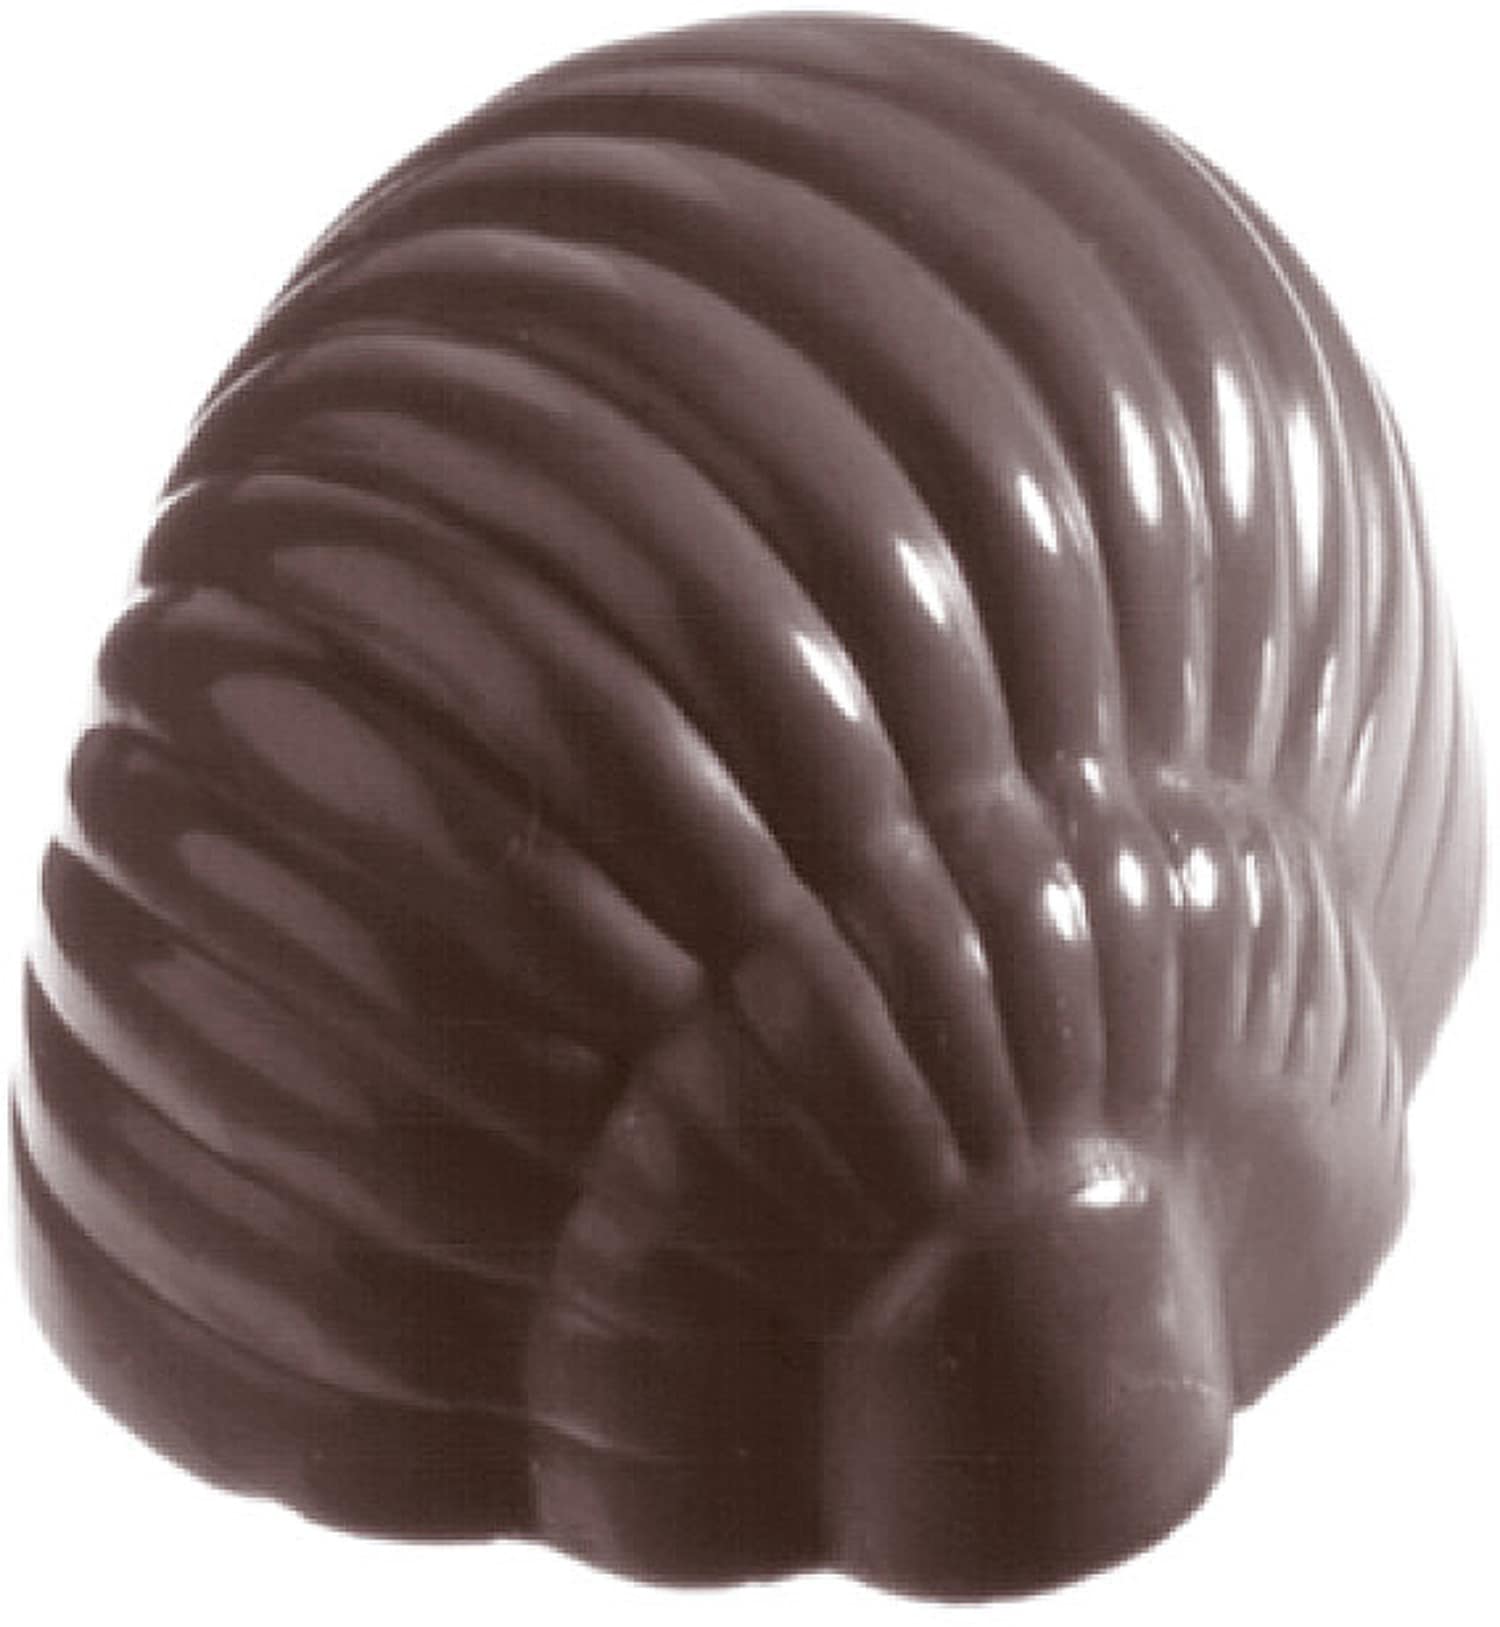 Chocolate mould "Seafood" 421084